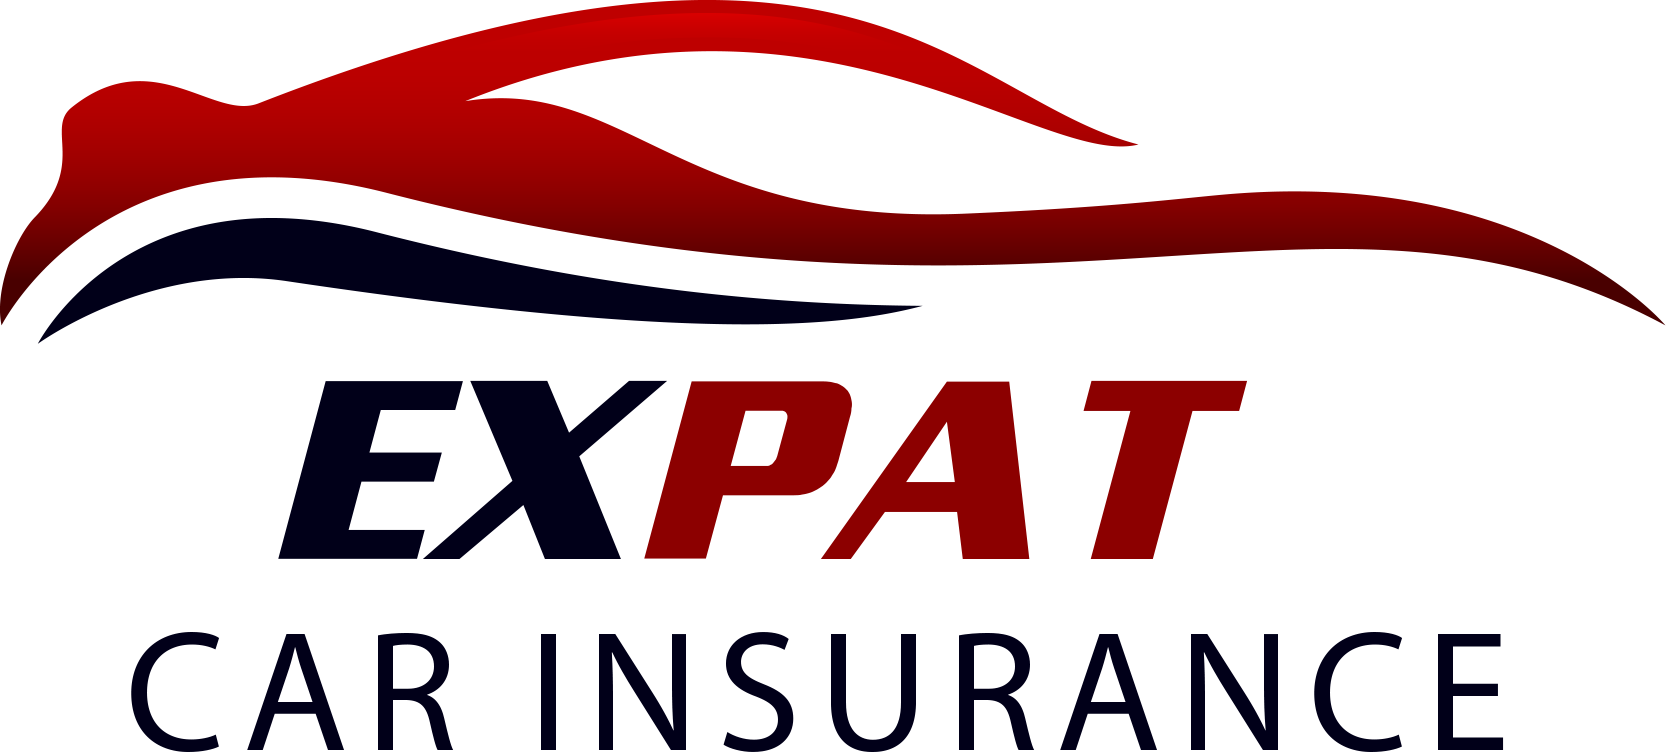 Cheap Car / Auto Insurance for Expats in Germany - Expat Car Insurance